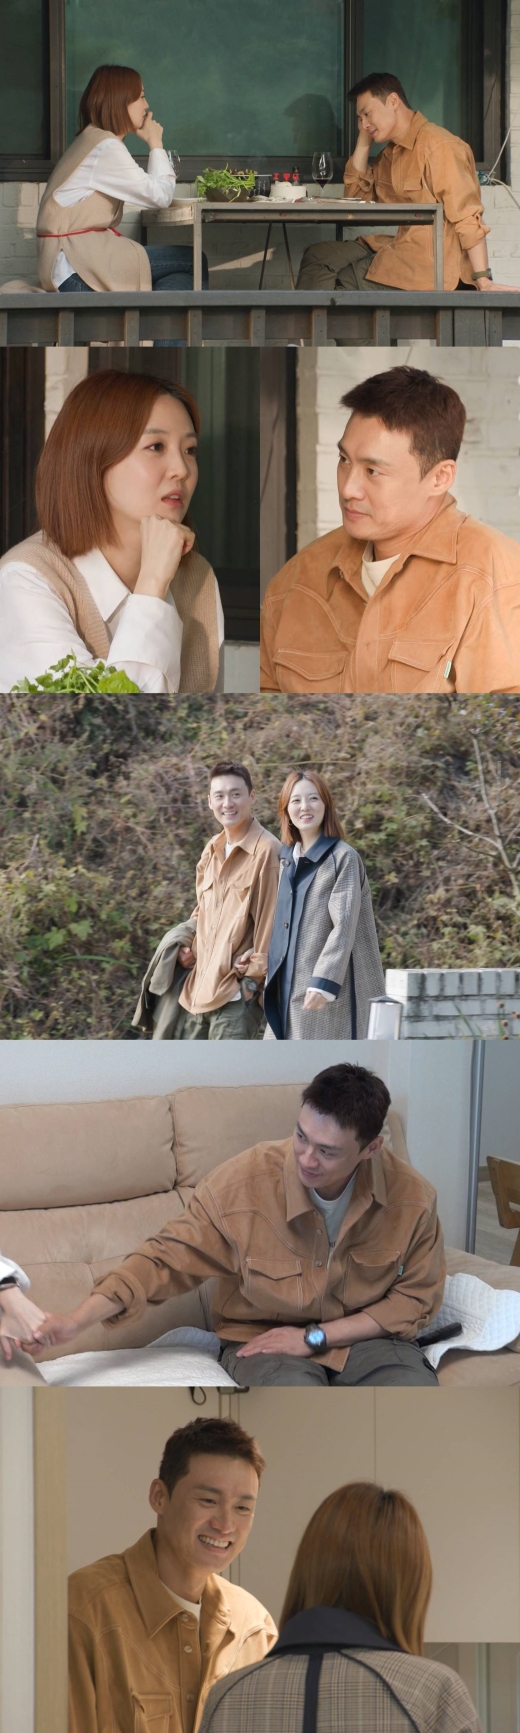 Oh Sang-jin, Kim So-young The honest conversation of the couple is revealed.On SBS Same Bed, Different Dreams 2: You Are My Dest - You Are My Destiny, a special day of Oh Sang-jin and Kim So-young who are looking for honeymoon is revealed.On this day, Oh Sang-jin and Kim So-young caught the eye by revealing that they had a second plan. Oh Sang-jin started a hot night operation for Kim So-young by creating a honeymoon mood.Oh Sang-jin said, Ill take care of it all tonight. He tried to make a 29 gold skinship, and he was amazed at Kim So-young by showing his madness, such as sticking to stamina dishes.Oh Sang-jin, who seems to have returned to his honeymoon, is also reported to have a special MC Sunwoo Eun-sook, who is in the 60th day of marriage.On the other hand, Oh Sang-jin was shocked by Kim So-youngs drunkenness.Kim So-young, who got a little drunk at a dinner with alcohol, expressed her regret over the recently neglected relationship between the couple. Kim So-young expressed bitterness over the fact that the relationship turned into a business relationship unlike when they were newlyweds six years ago, confessing, I think we will become cohabitants, not a couple if we live like this.Oh Sang-jin was shocked when his wife Kim So-young suddenly pulled out ahead of the second plan.The broadcast will be broadcast at 10:50 pm earlier than usual due to the broadcast of the 2022 Professional Baseball Korea Series 5 game.